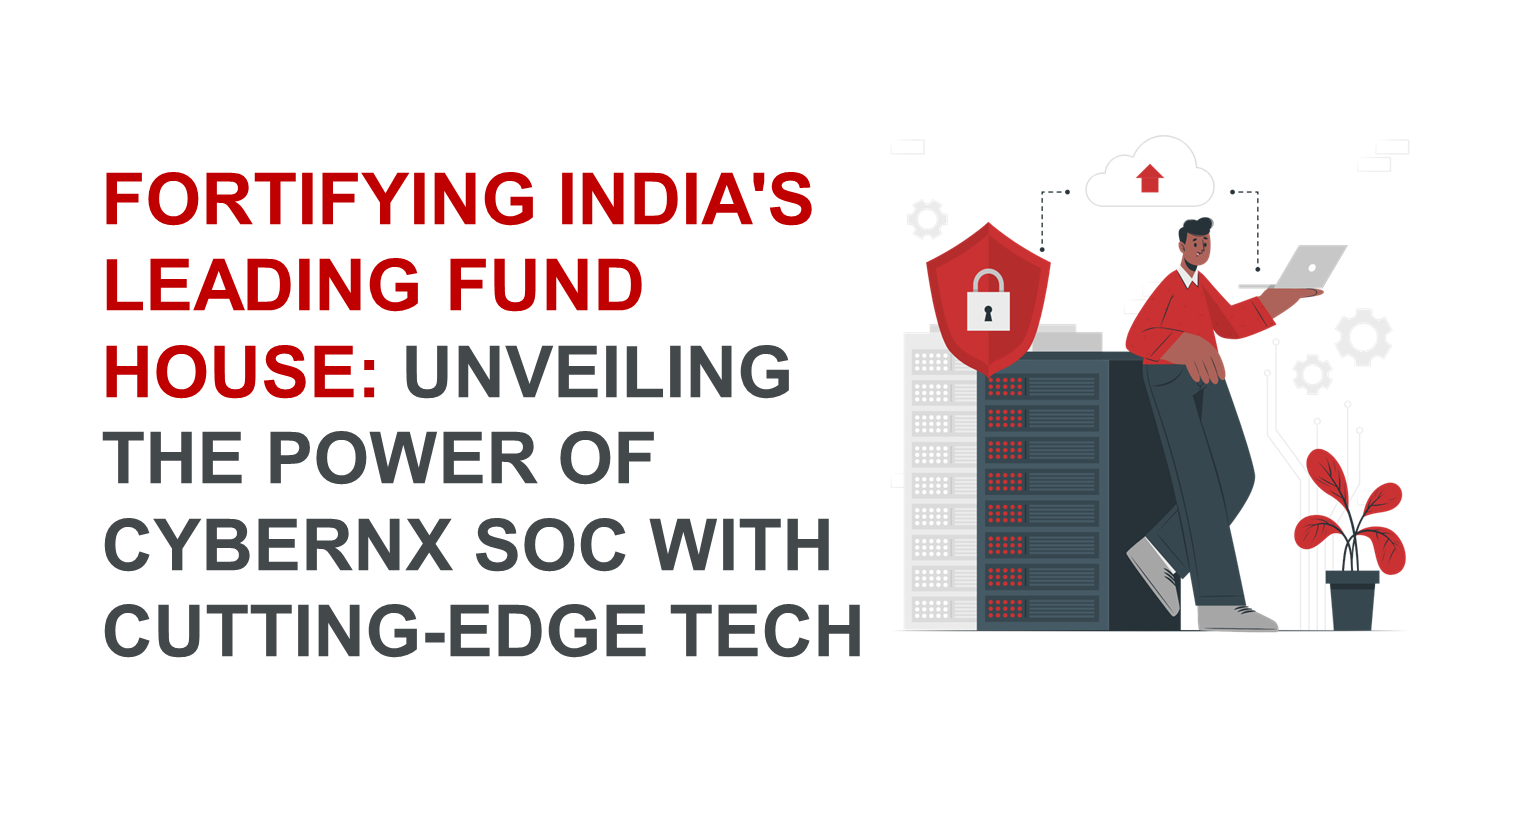 Fortifying India's Leading Fund House: Unveiling the Power of CyberNX SOC with Cutting-Edge Tech 